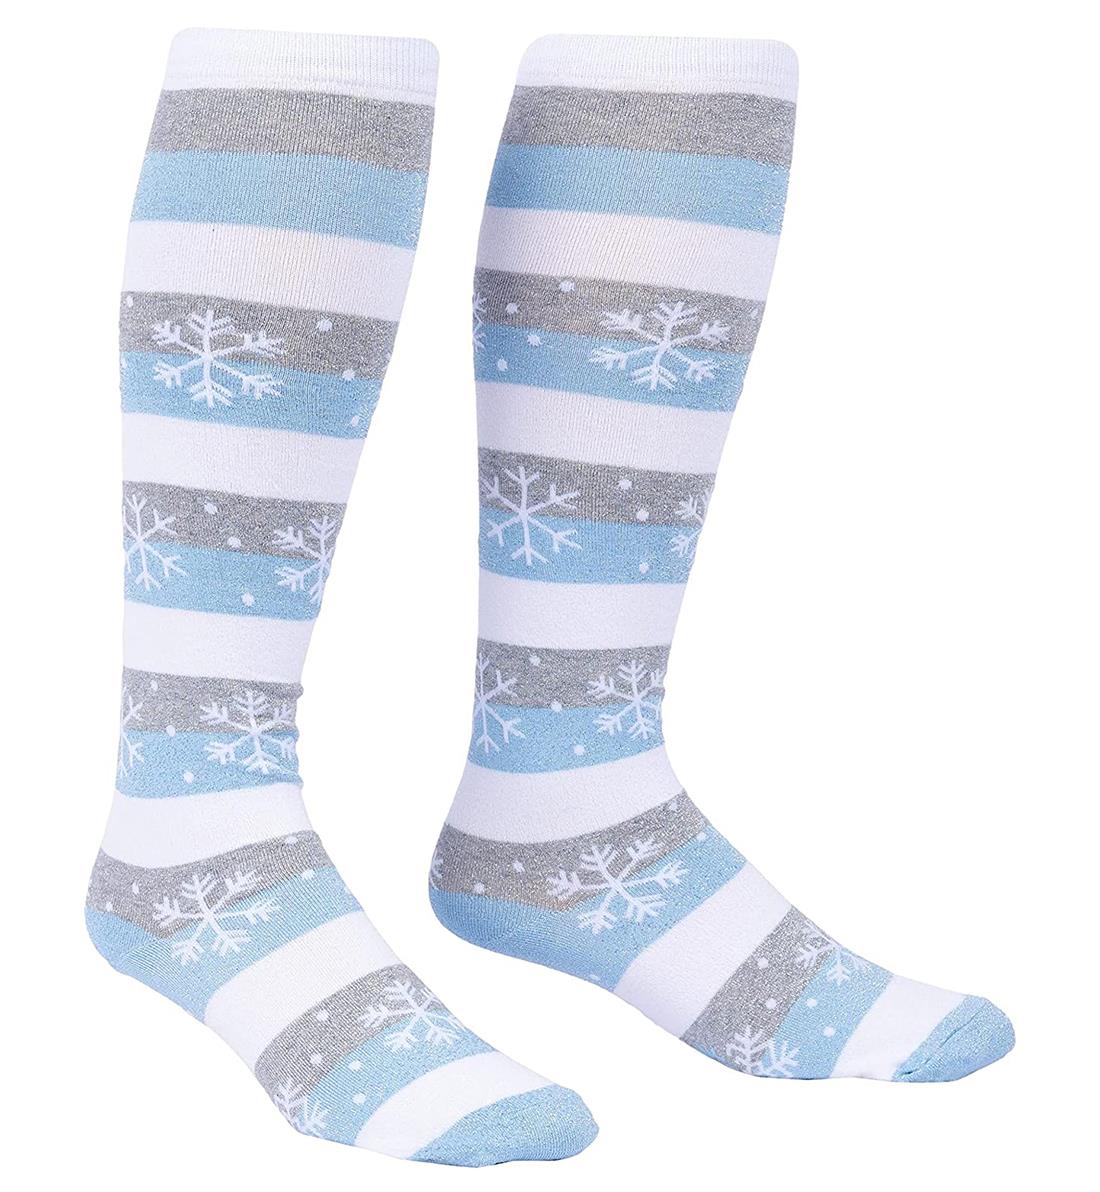 SOCK it to me Unisex Stretch-It Knee High Socks (S0154),Every One is Unique - Every One is Unique,One Size